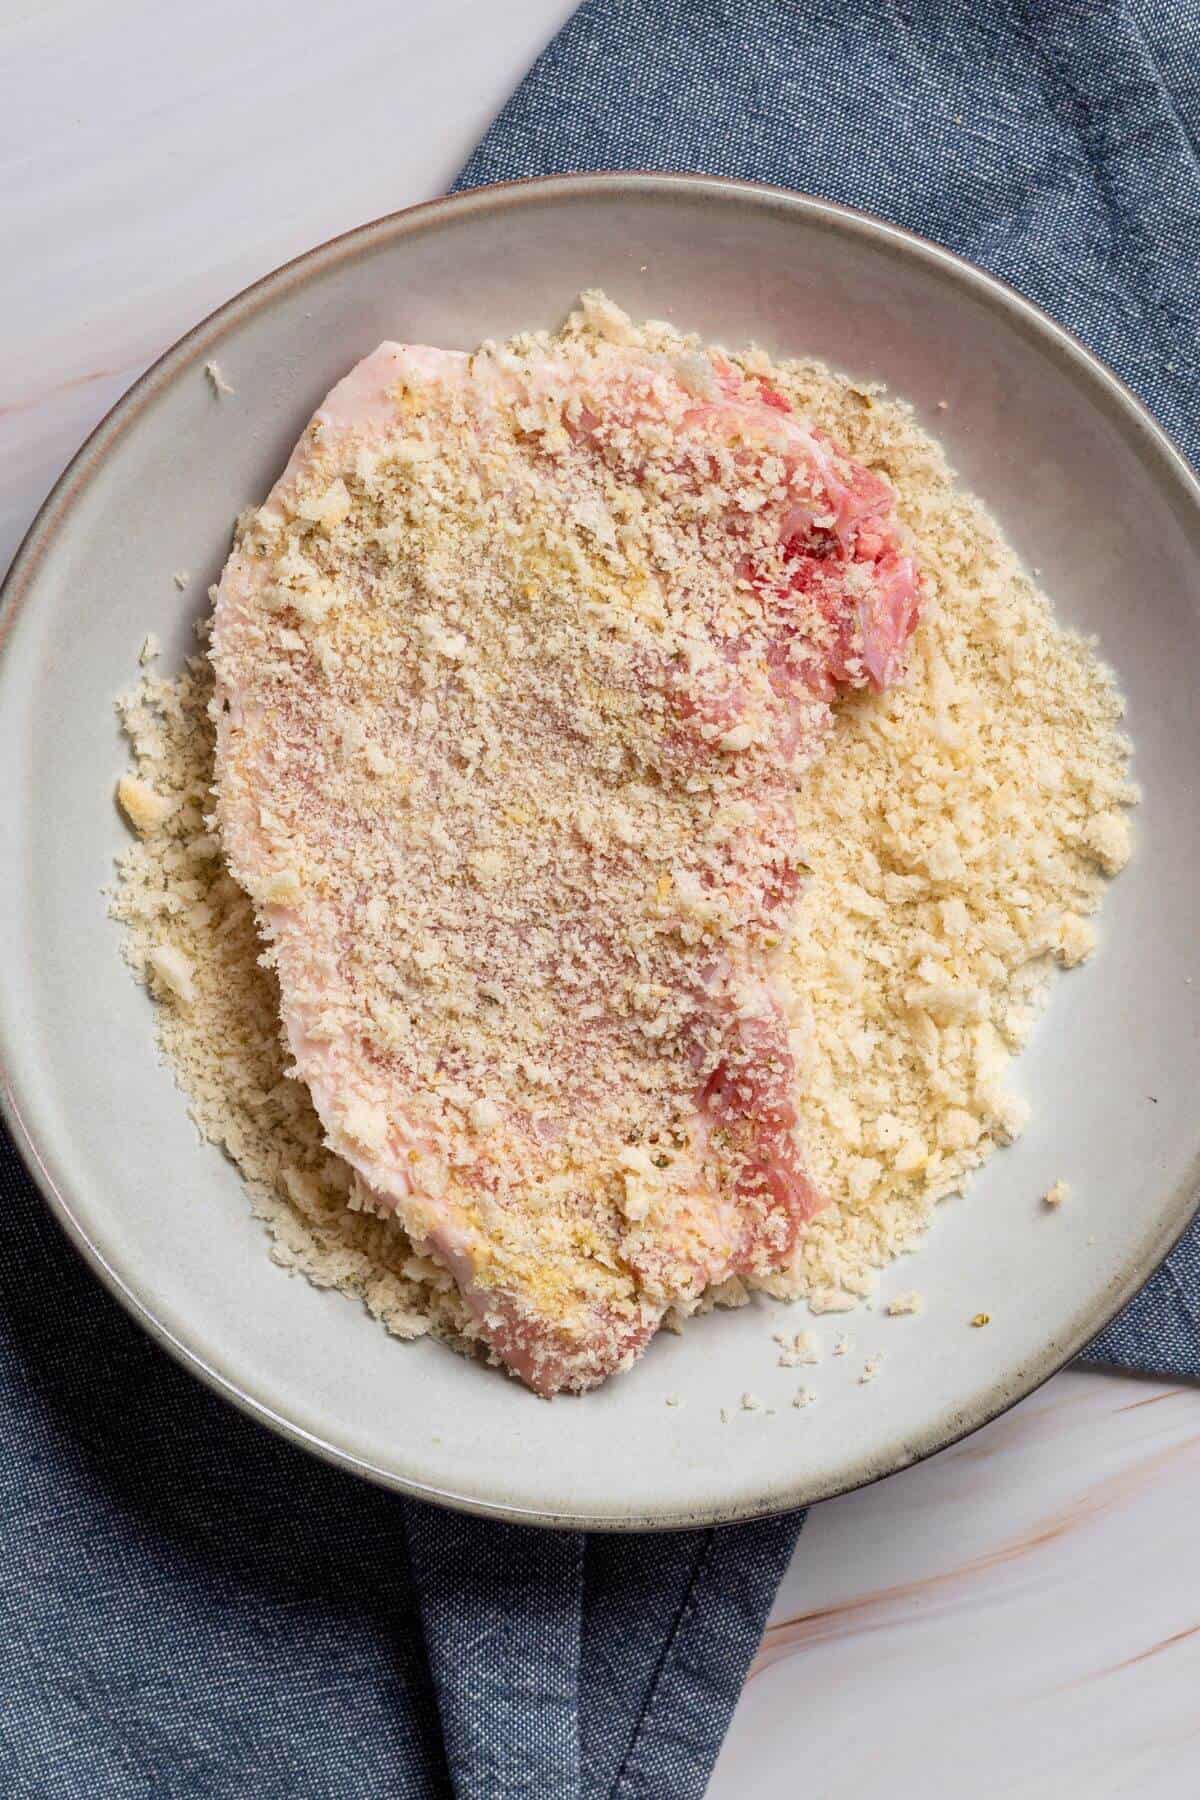 Meat dipped and covered in bread crumbs.